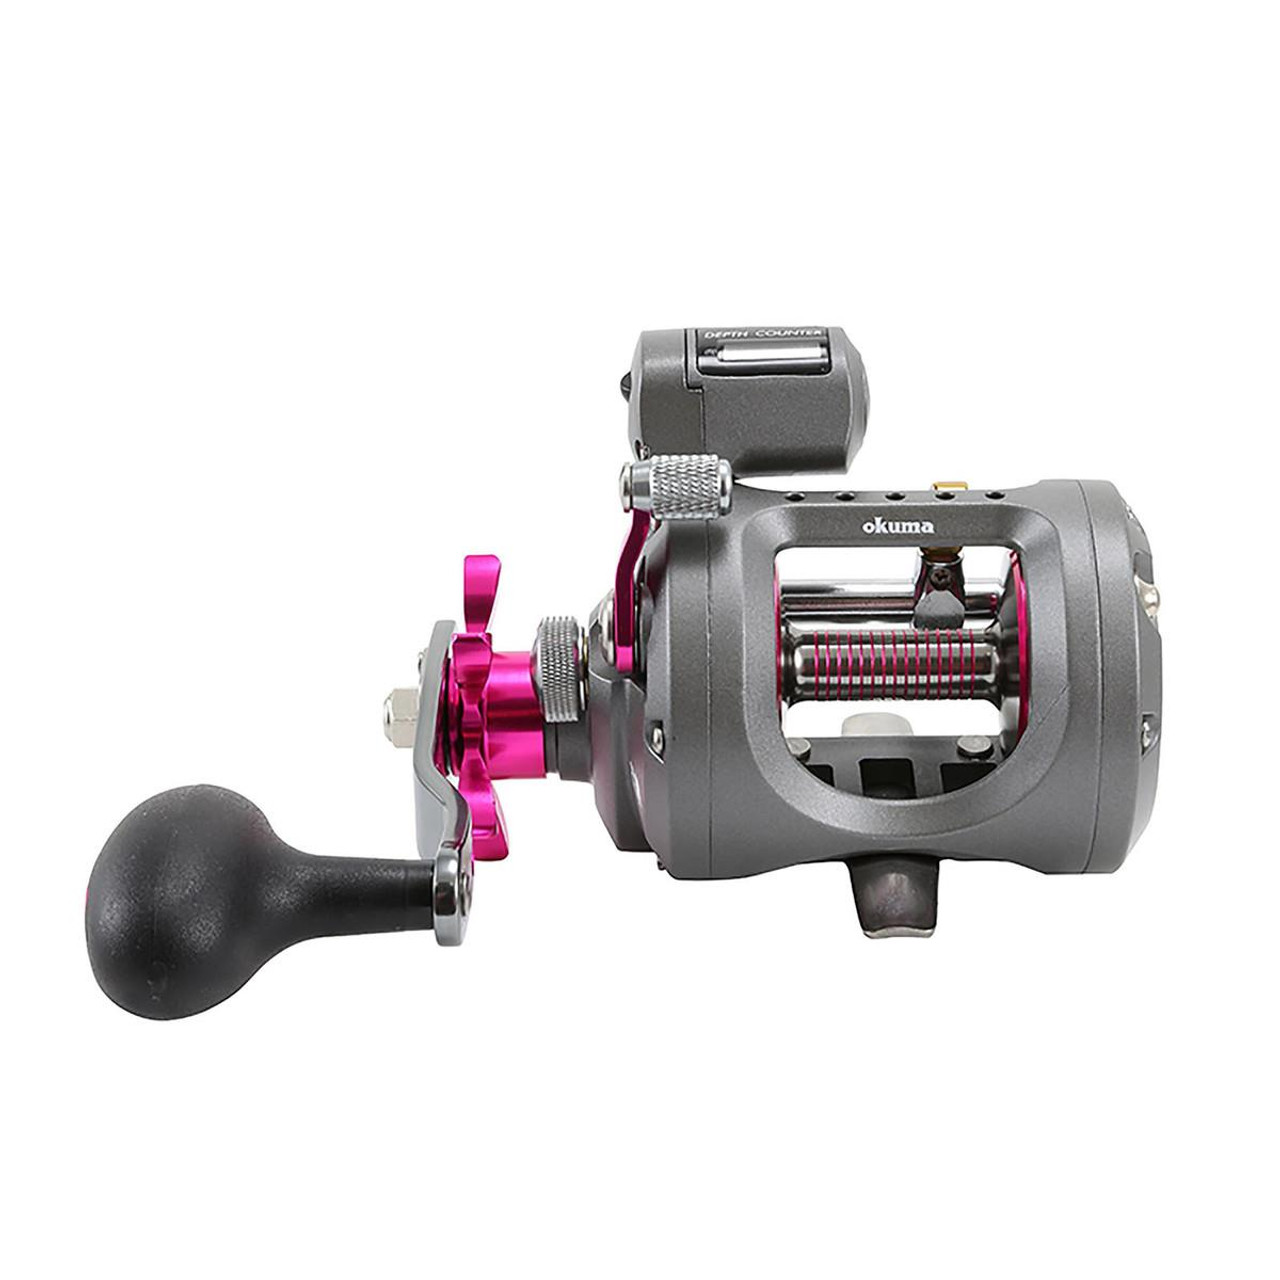 Okuma Rod and Reel Fishing Combo - sporting goods - by owner